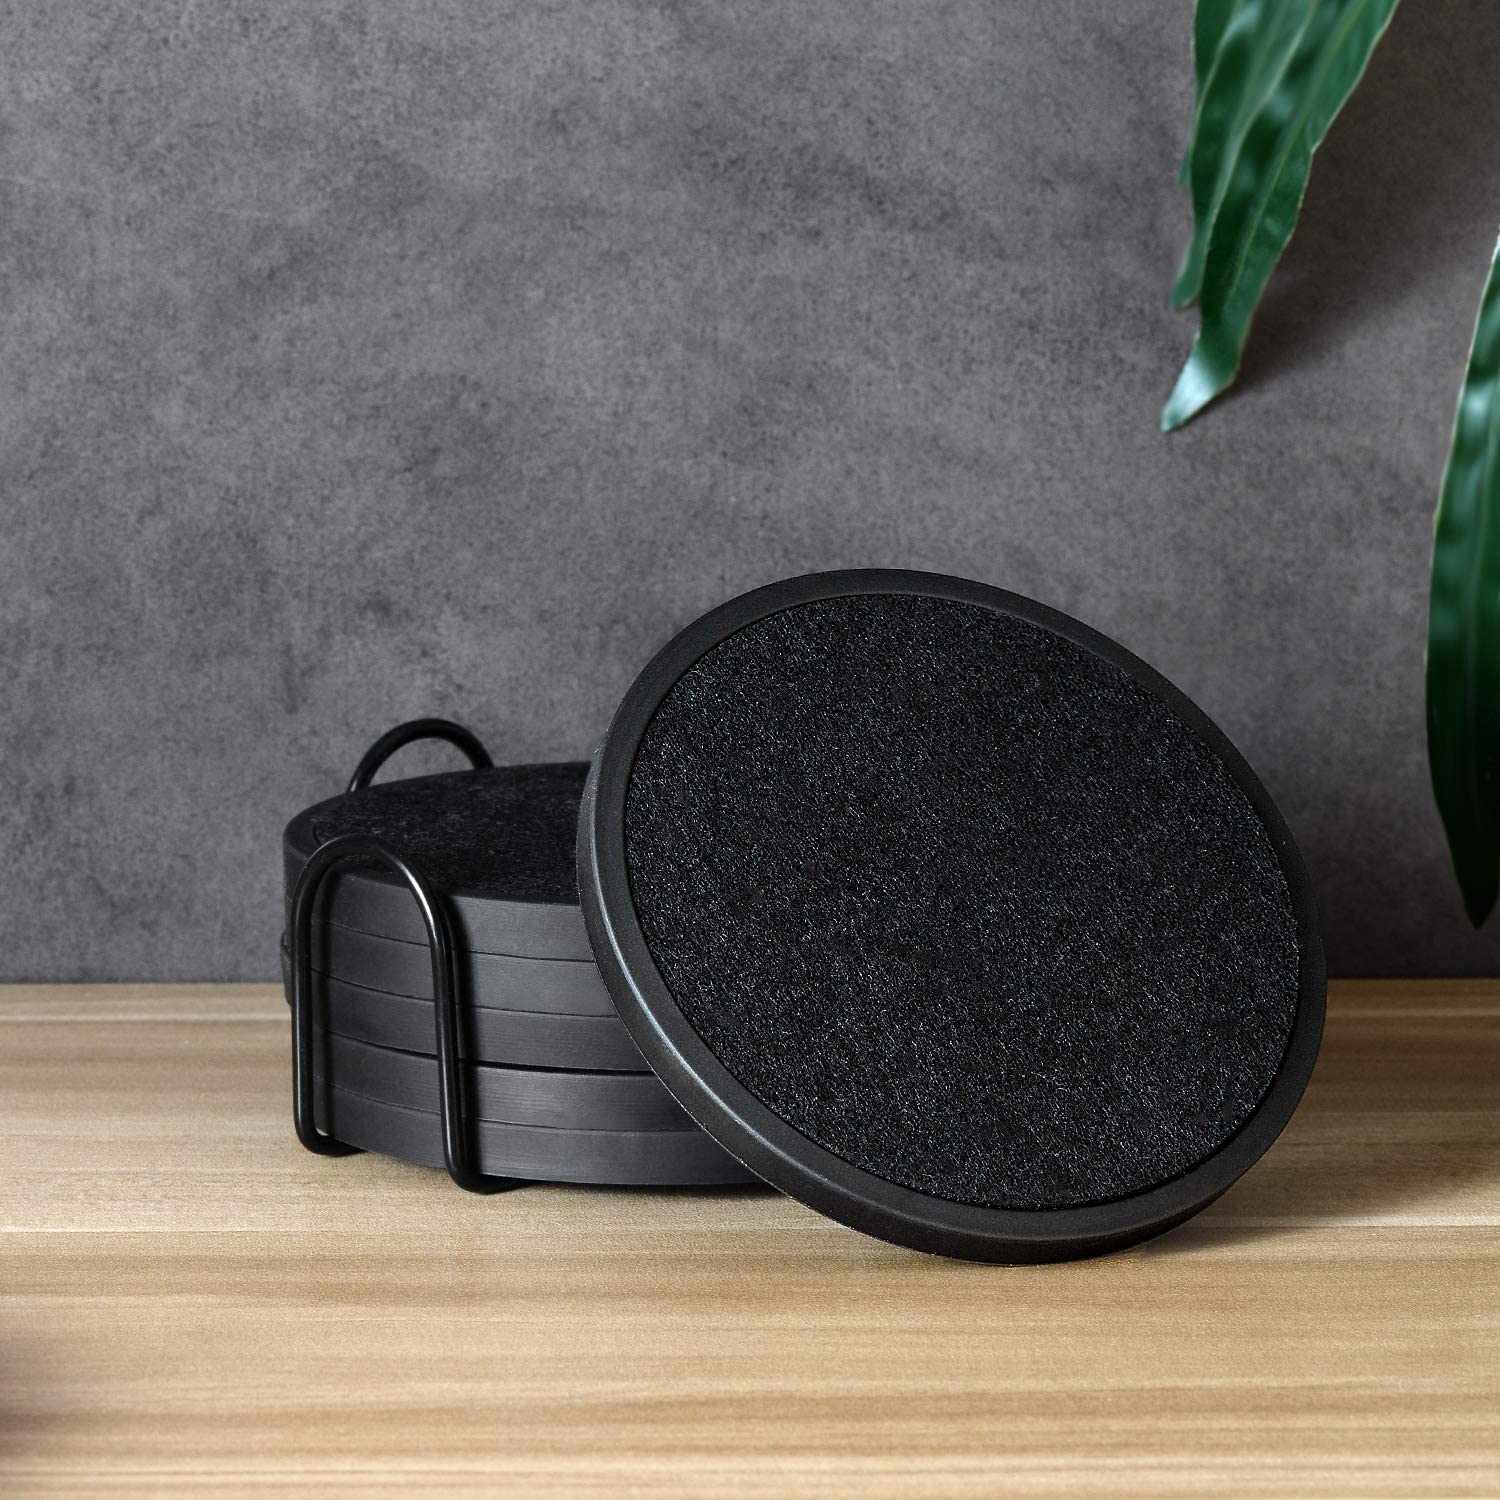 A set of 6 absorbent black coasters in a black metal holder. The set of coasters are on a wooden table.